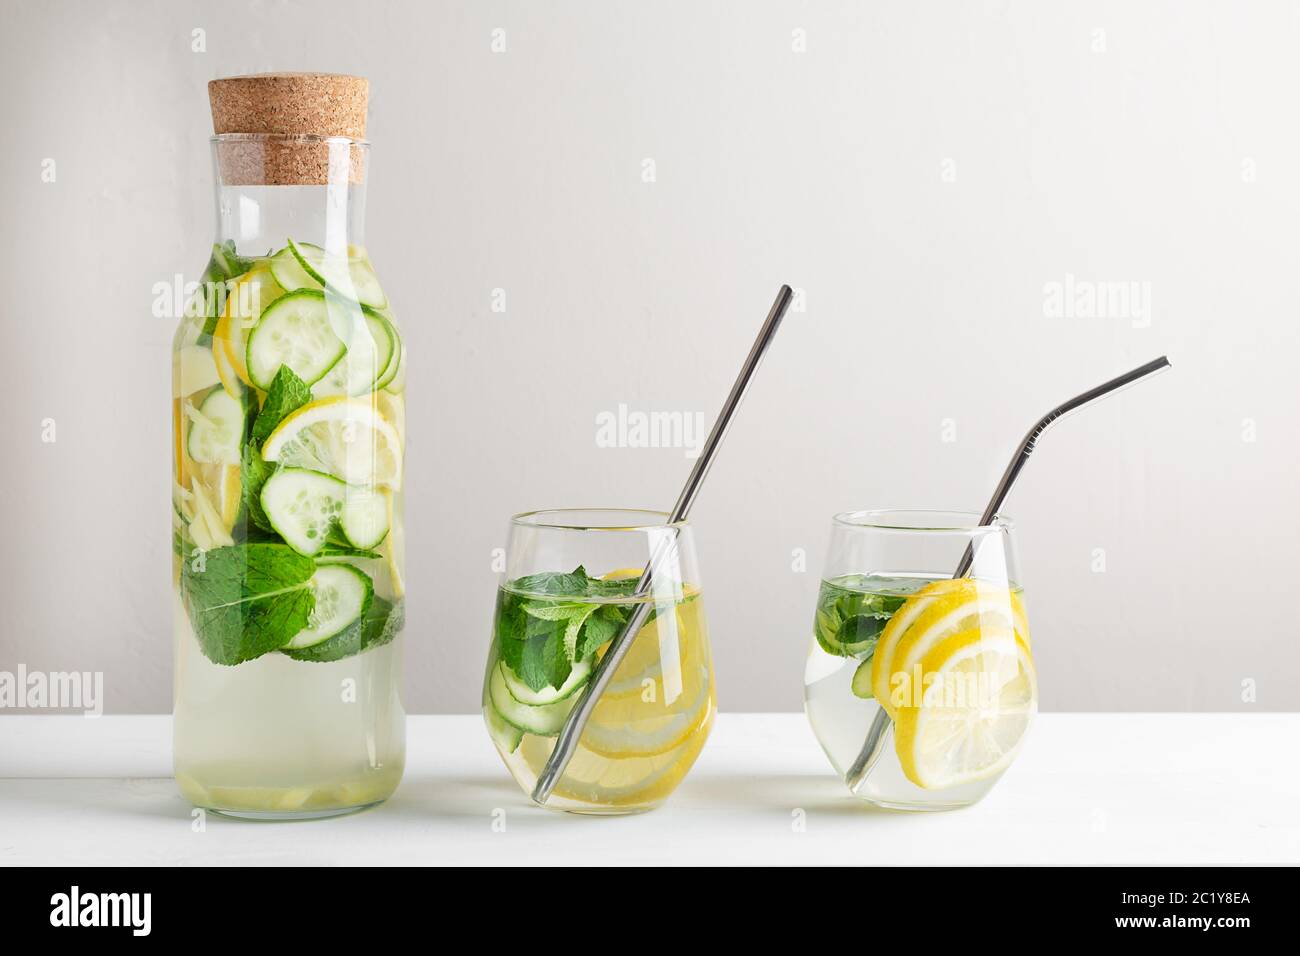 Sassy water slimming or infused water with lemon,mint, cucumber and ginger in glasses with metal tubes. Zero waste concept. Stock Photo